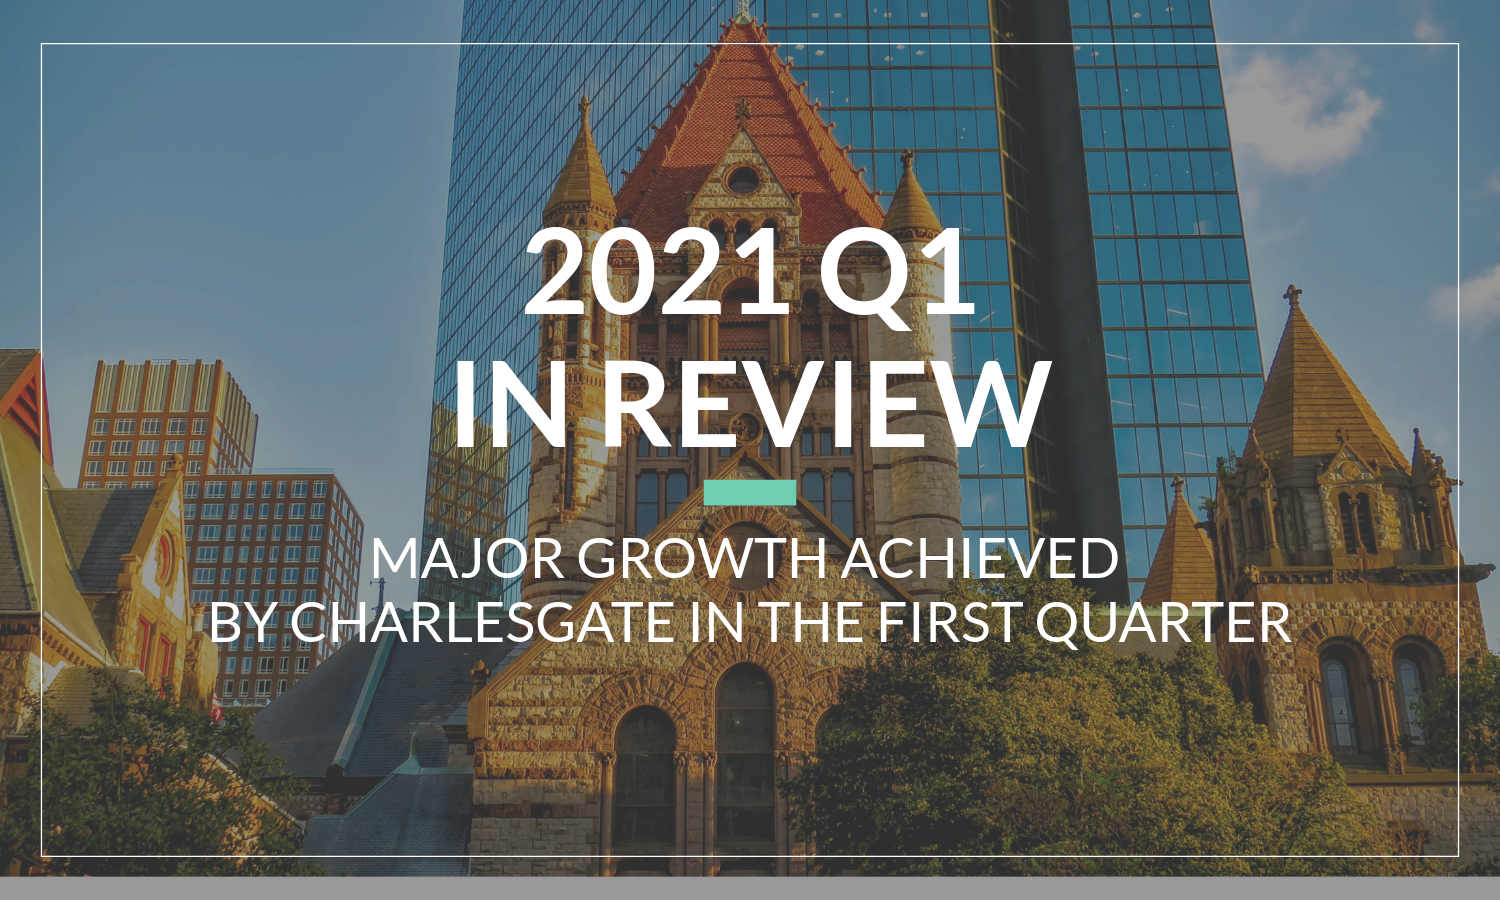 CHARLESGATE Announces Incredible Growth in the First Quarter 2021